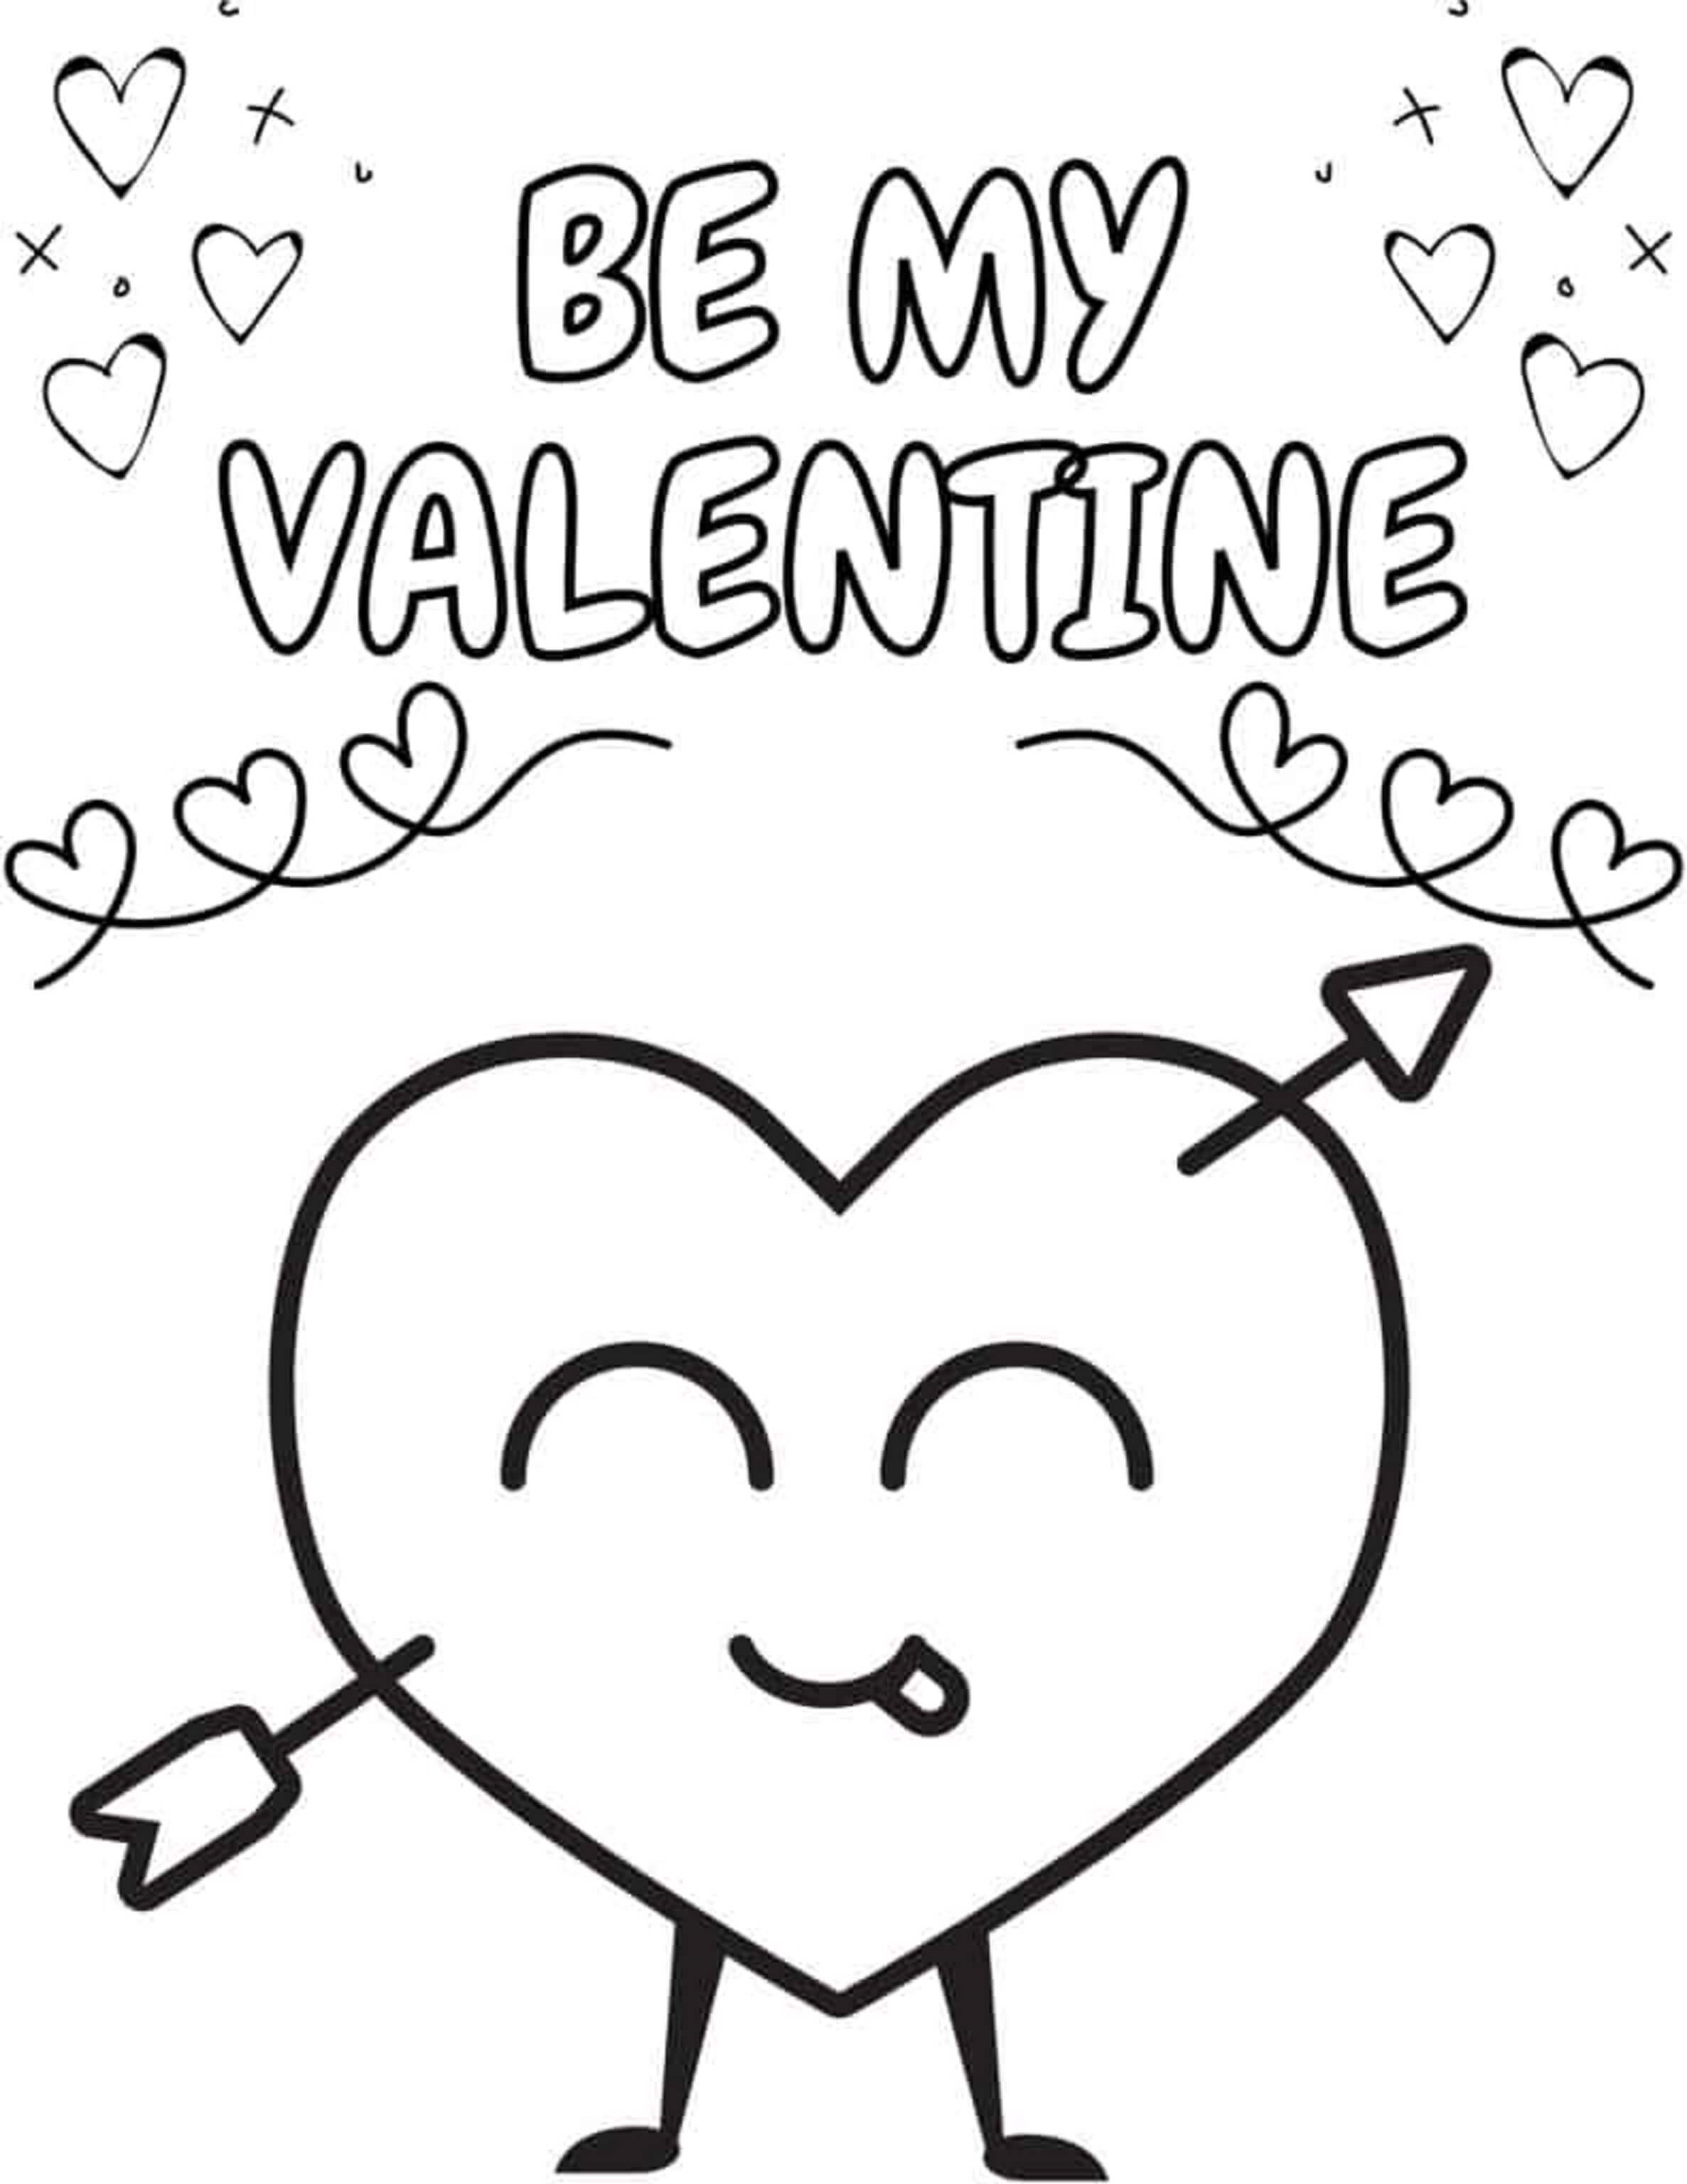 Be My Valentine Coloring Pages Free